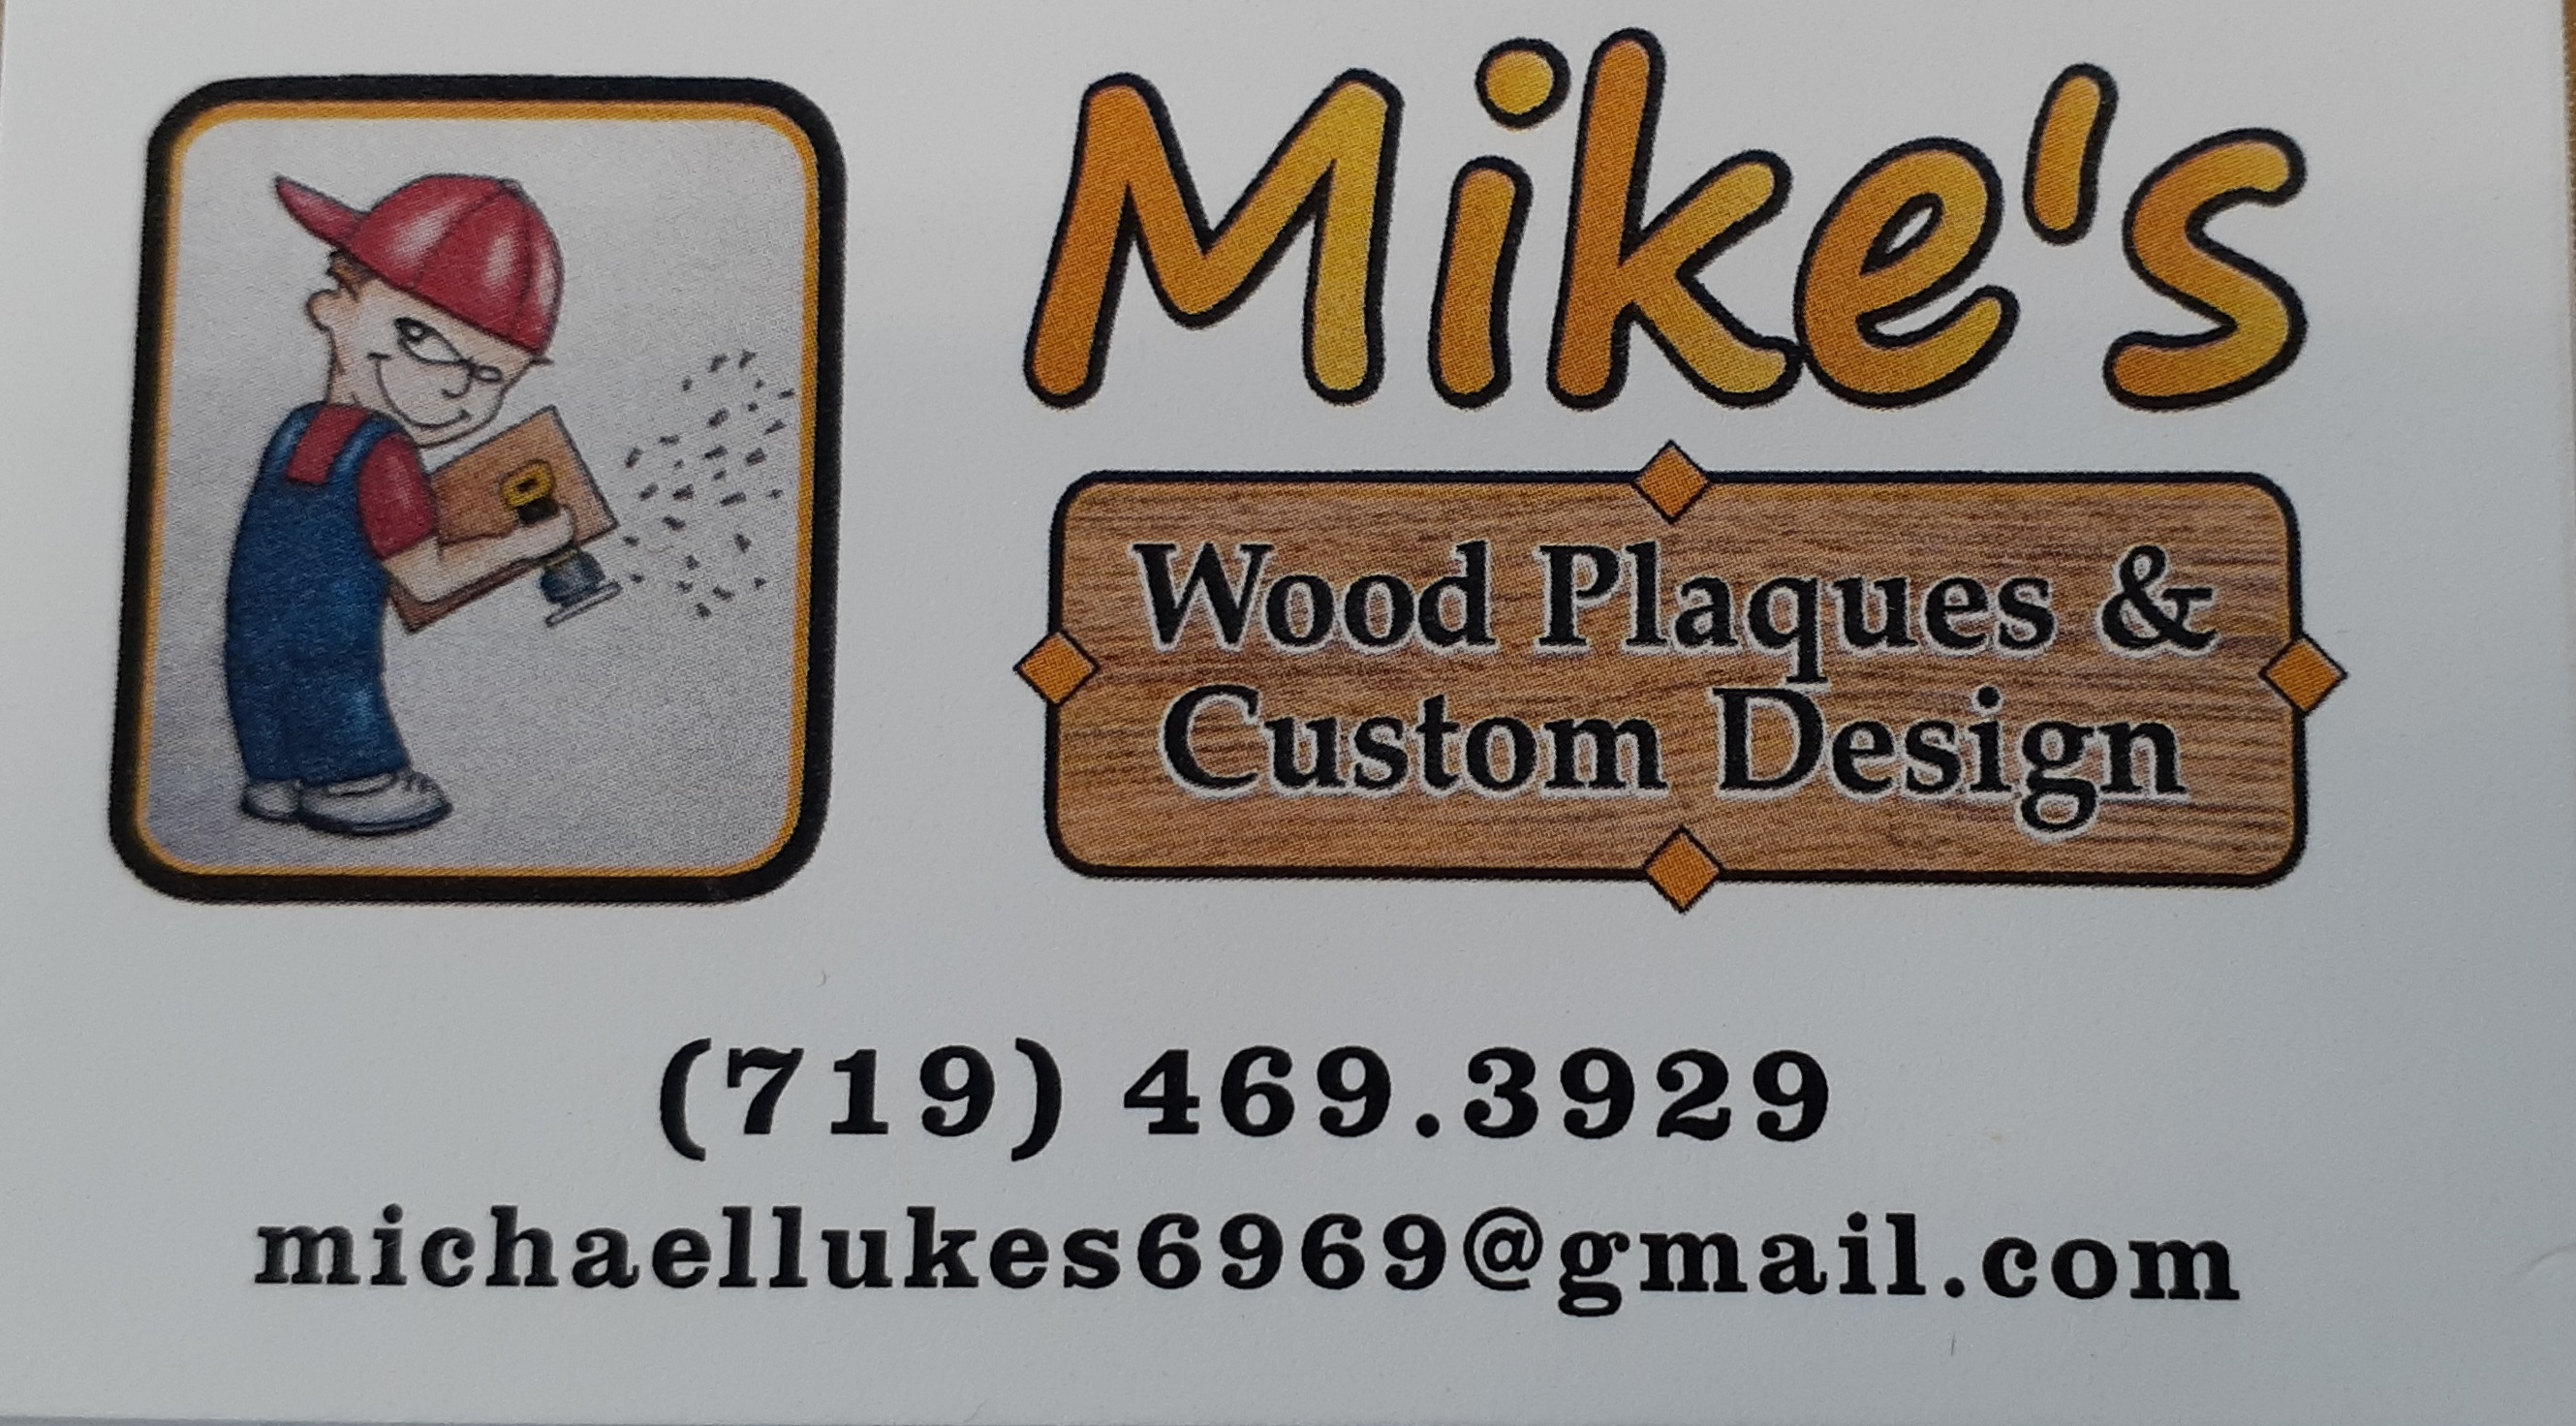 Mike's Wood Plaques and Designs seconews.org 